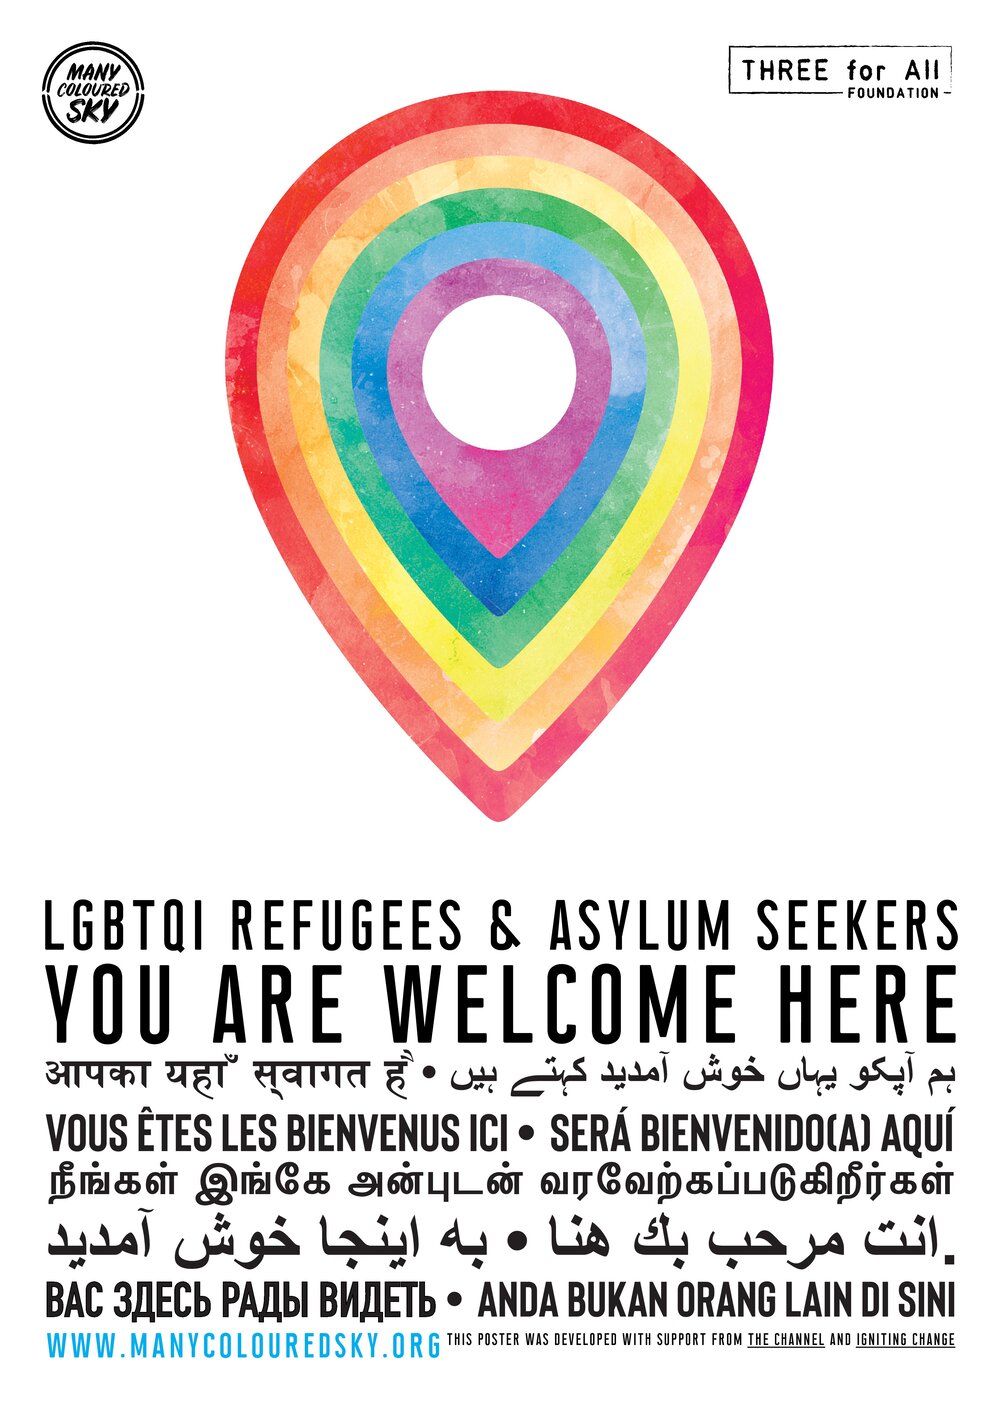 Poster features a location pin icon with white circle in the middle and layers of rainbow colours around it forming the teardrop shape. Below the pin are text that says LGBTI REFUGEES & ASYLUM SEEKERS. Followed by YOU ARE WELCOME HERE in nine languages, including arabic, tamil, malay or indonesian. The organization logo is featured on the top right and left corners. The name of the website also appears at the bottom of the poster. 